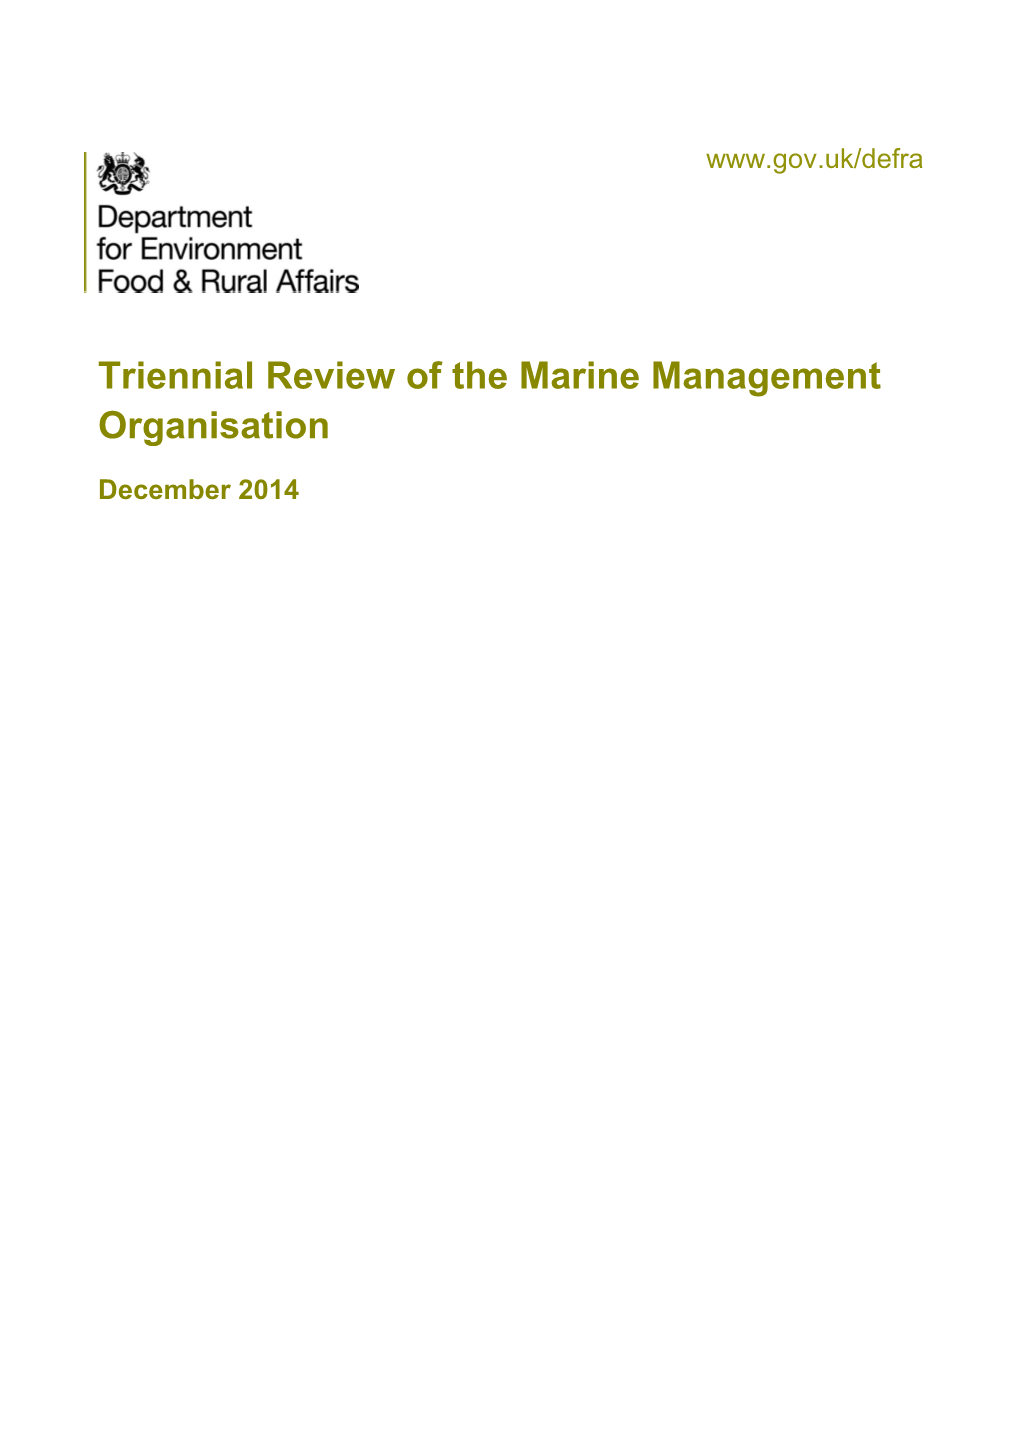 Triennial Review of the Marine Management Organisation